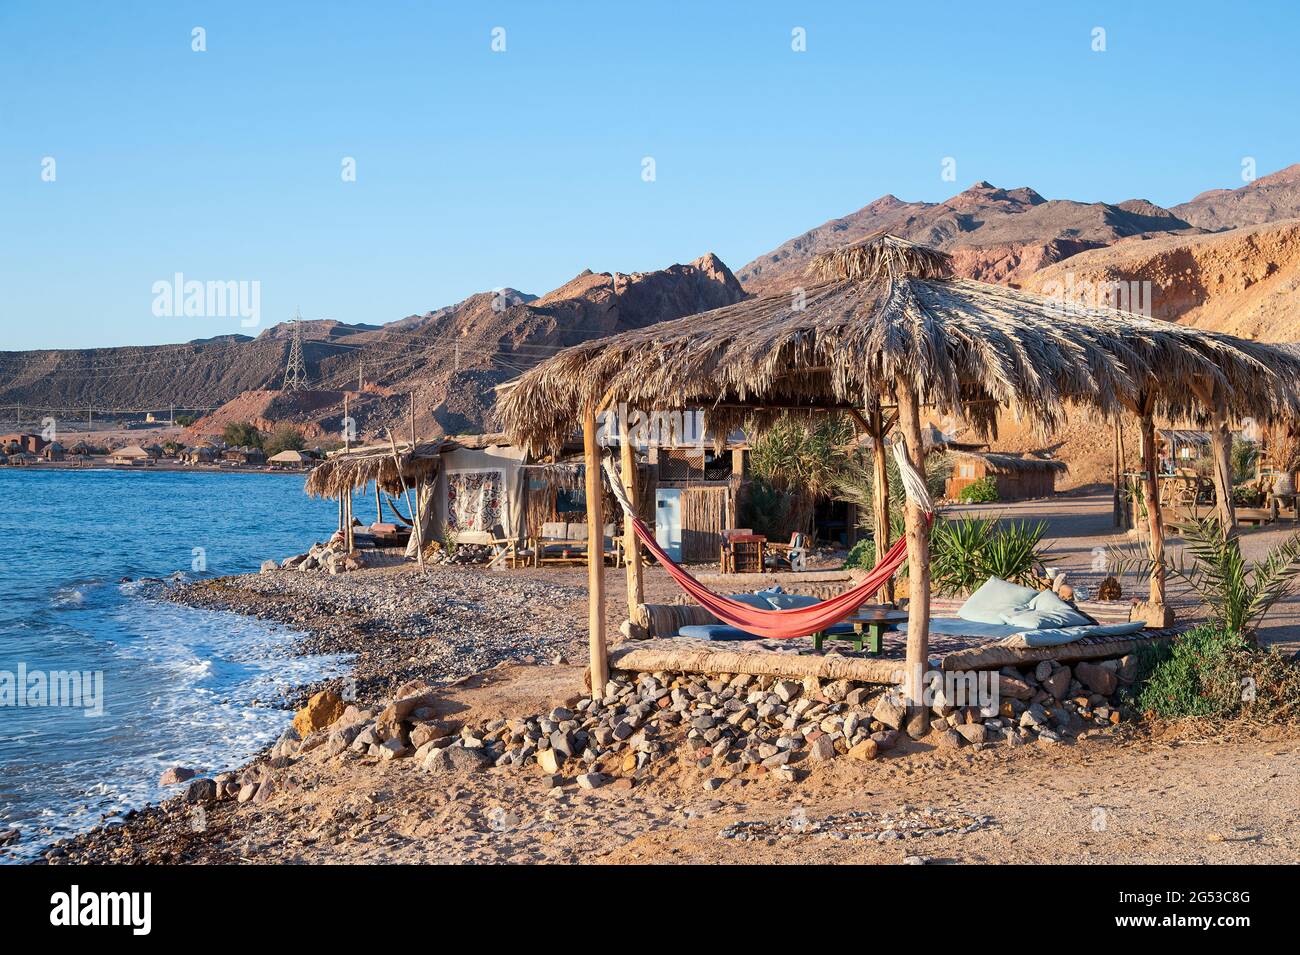 EGYPT, SINAI: RockSea is an eco seaside resort north of Nuweiba for lovers of simplicity who can nonetheless appreciate the availability of electricit Stock Photo